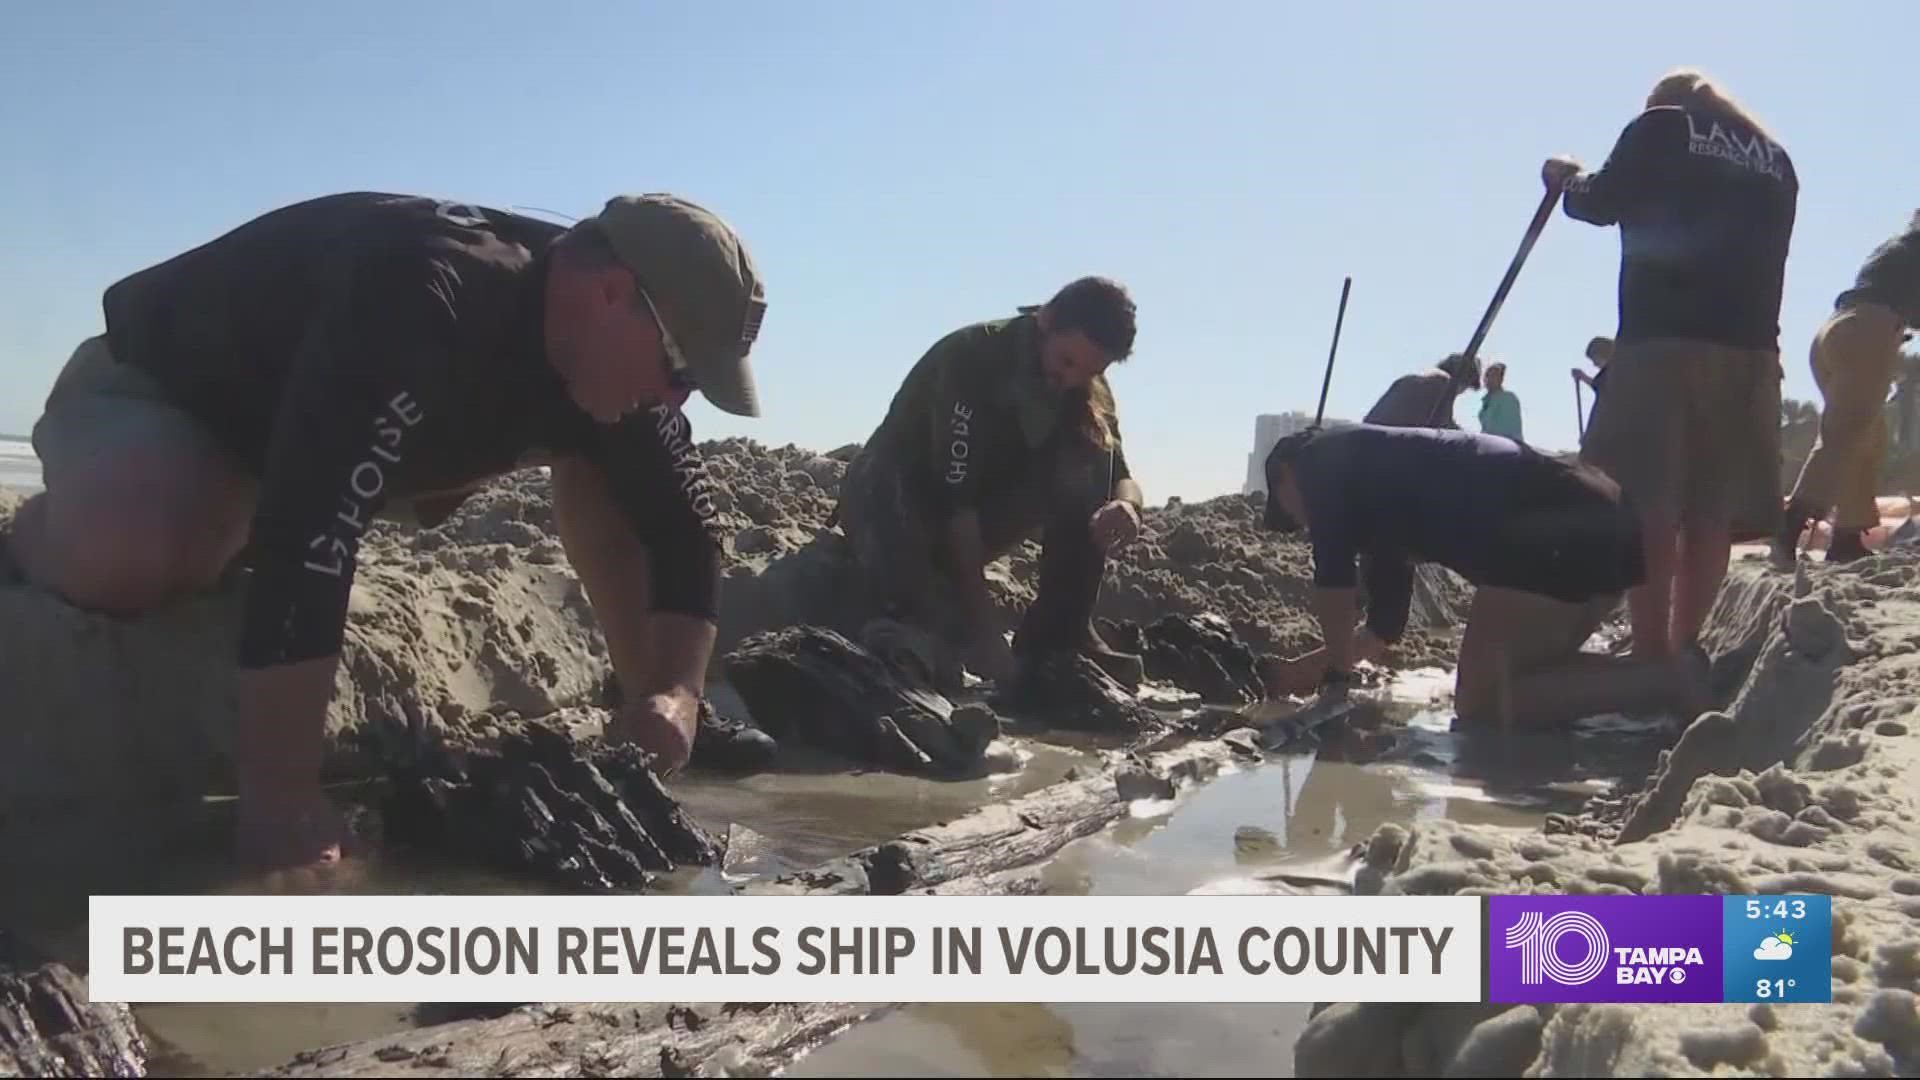 Two late-season hurricanes helped uncover what appears to be a wooden ship dating back to the 1800s.